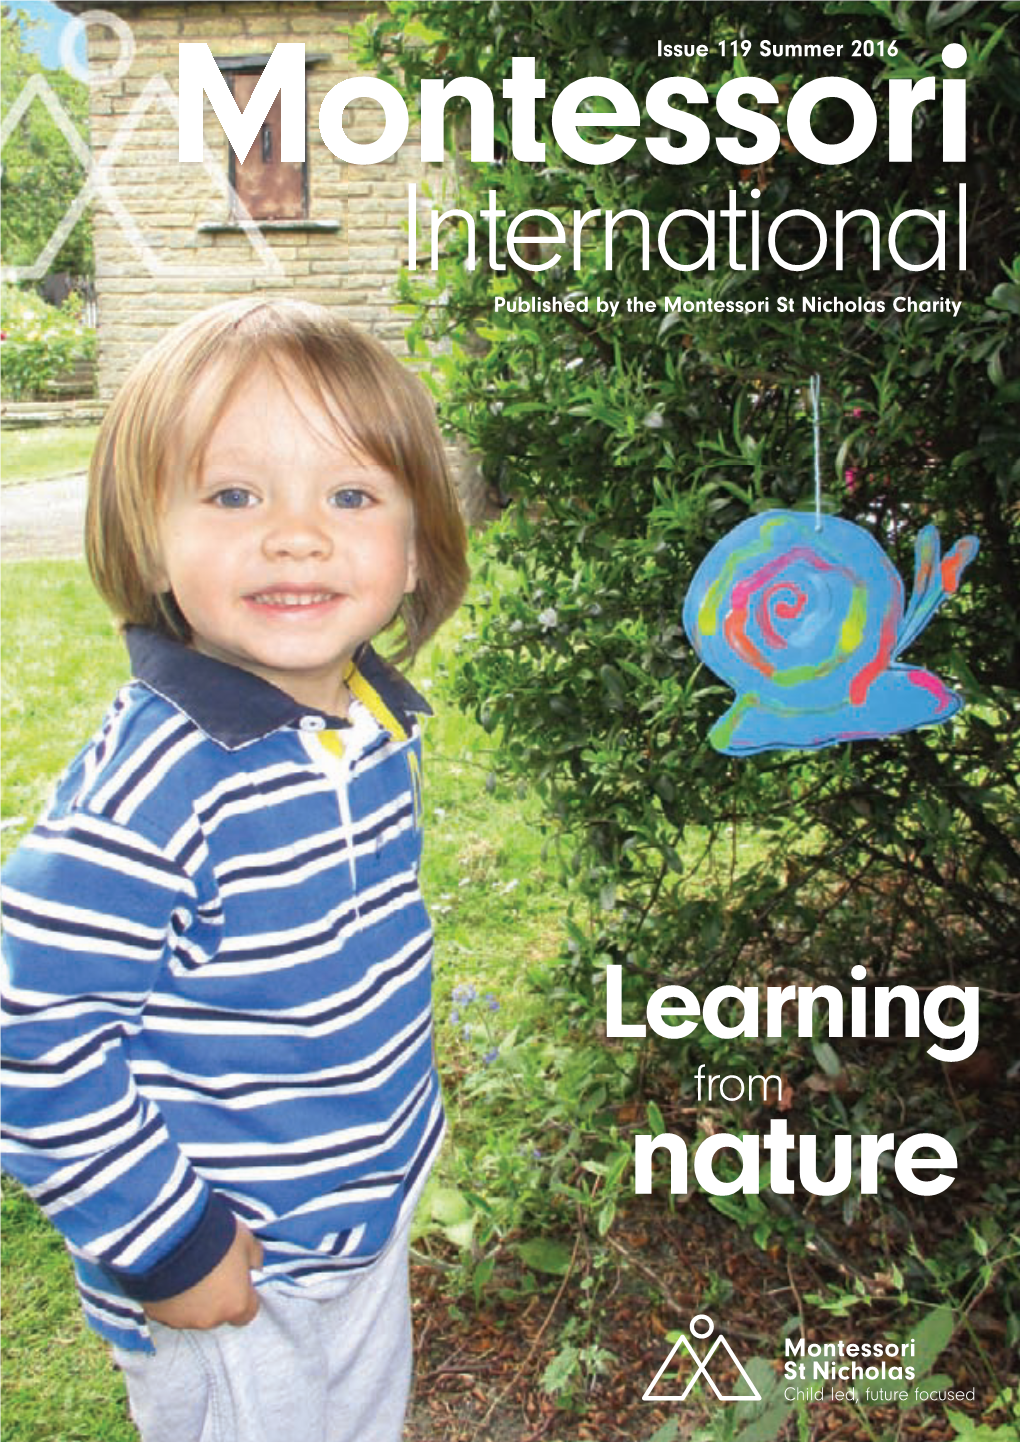 Learning from Nature MI119 Summer 2016:Layout 1 04/08/2016 12:54 Page 2